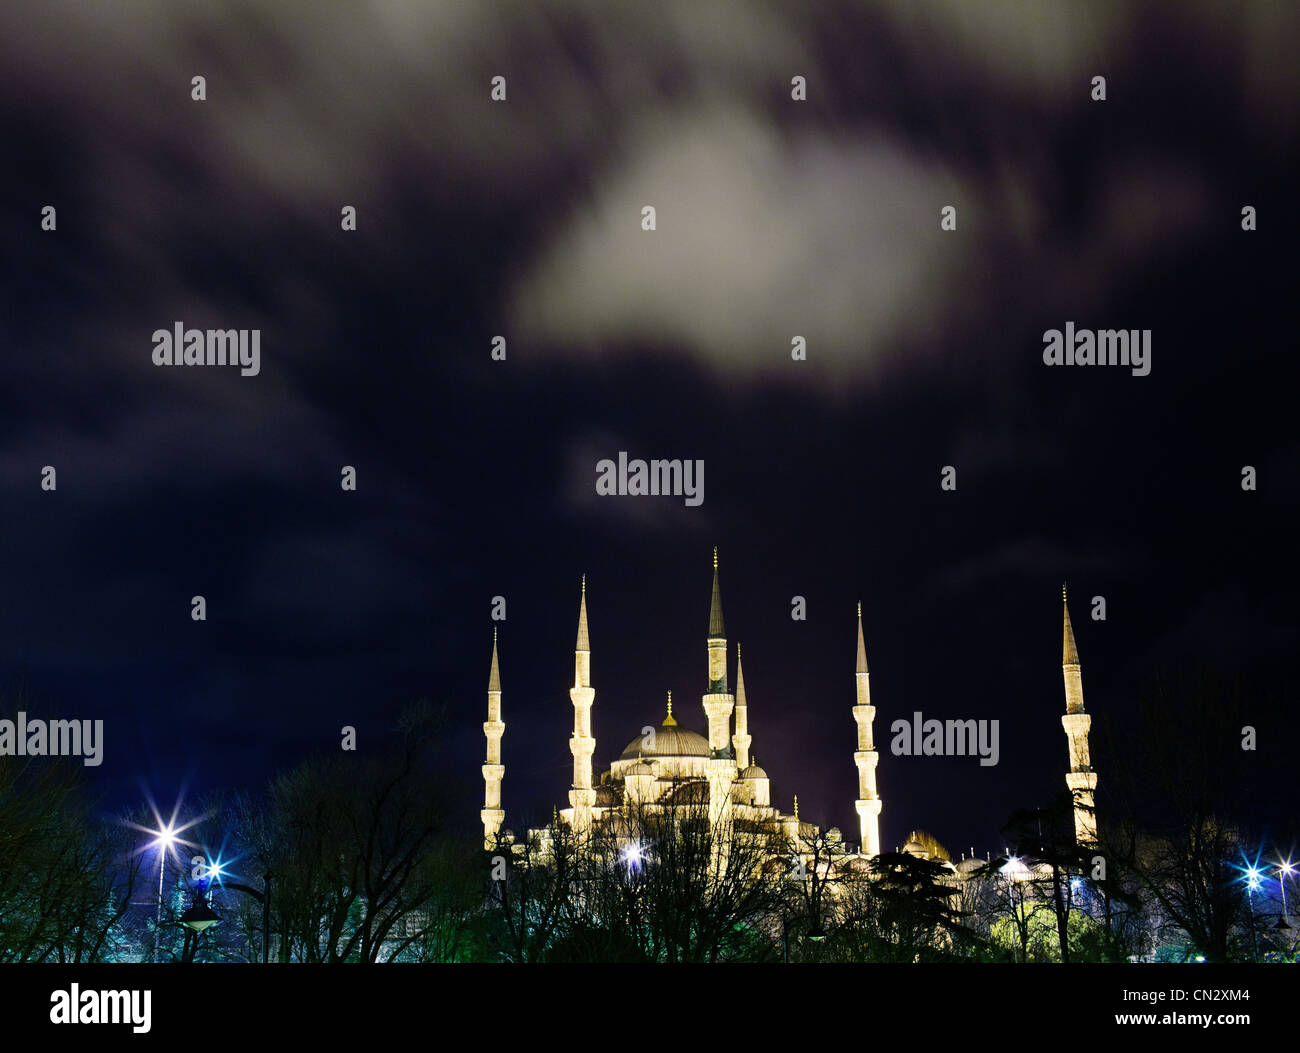 Sultan Ahmed mosque at night, Istanbul, Turkey Stock Photo